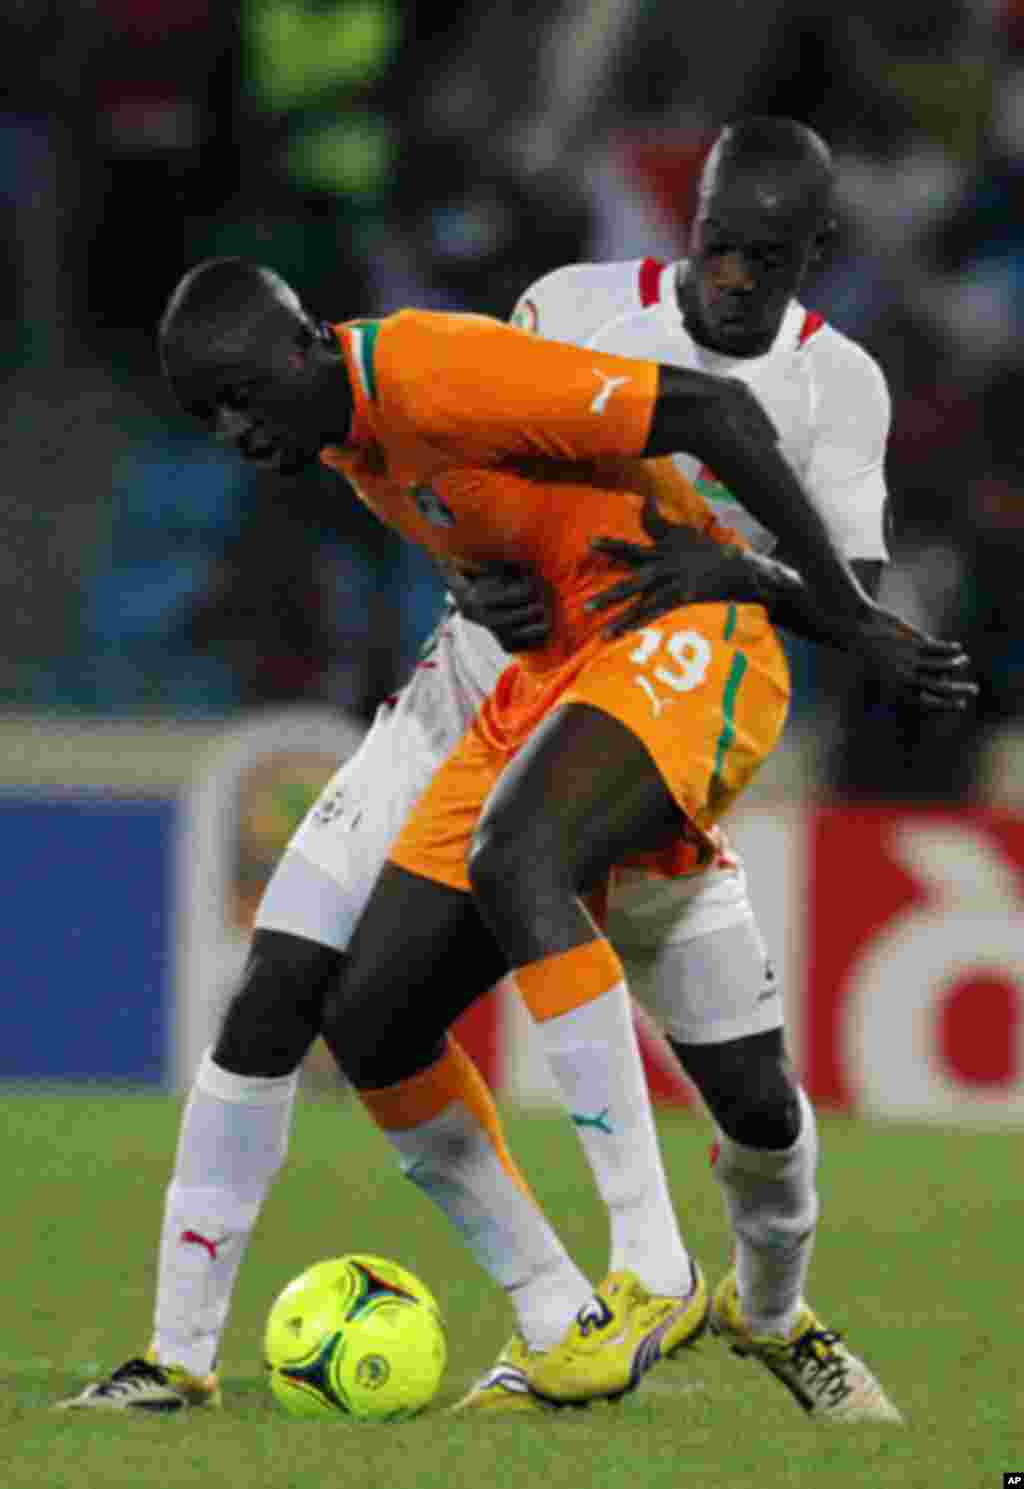 Toure of Ivory coast fights for the ball with Kere of Burkina Faso during their African Nations Cup soccer match in Malabo